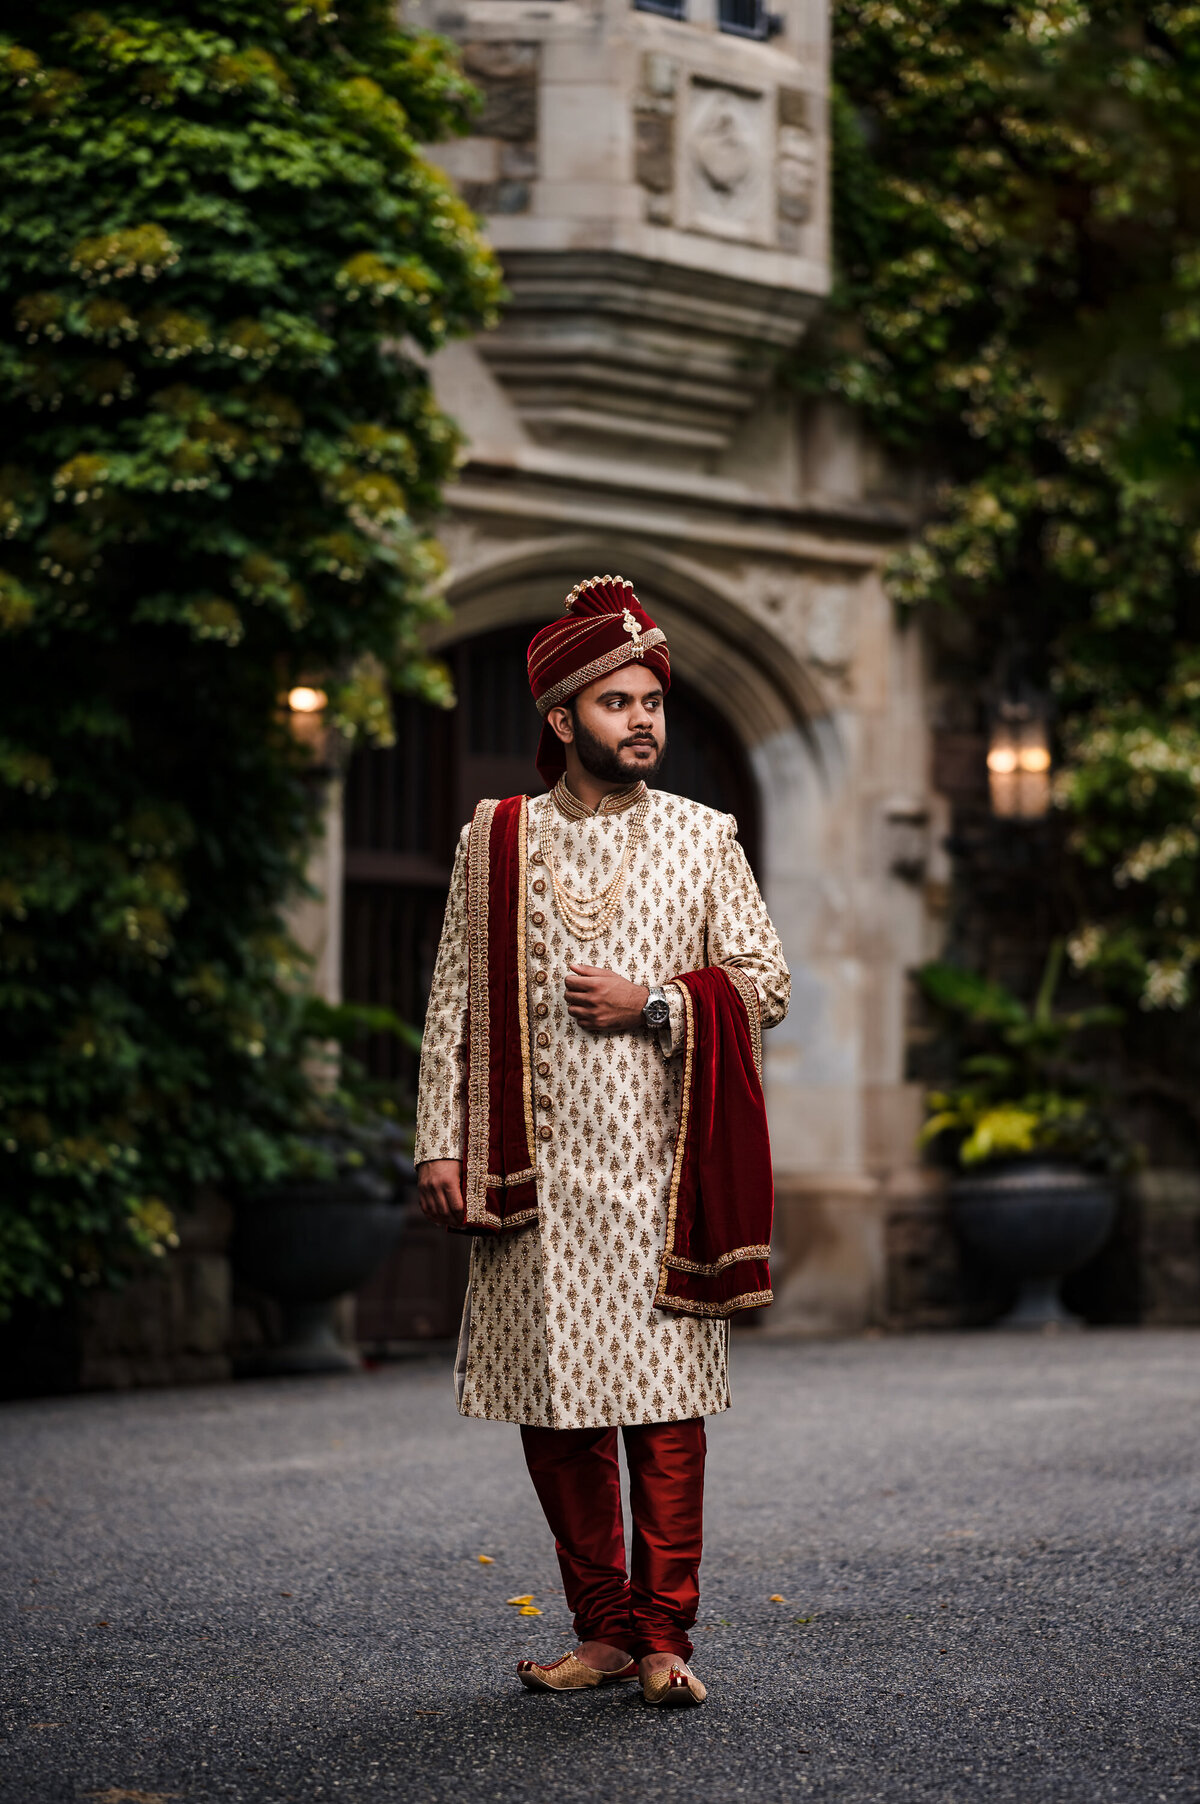 Ishan Fotografi is an NYC Indian wedding photographer for timeless memories.